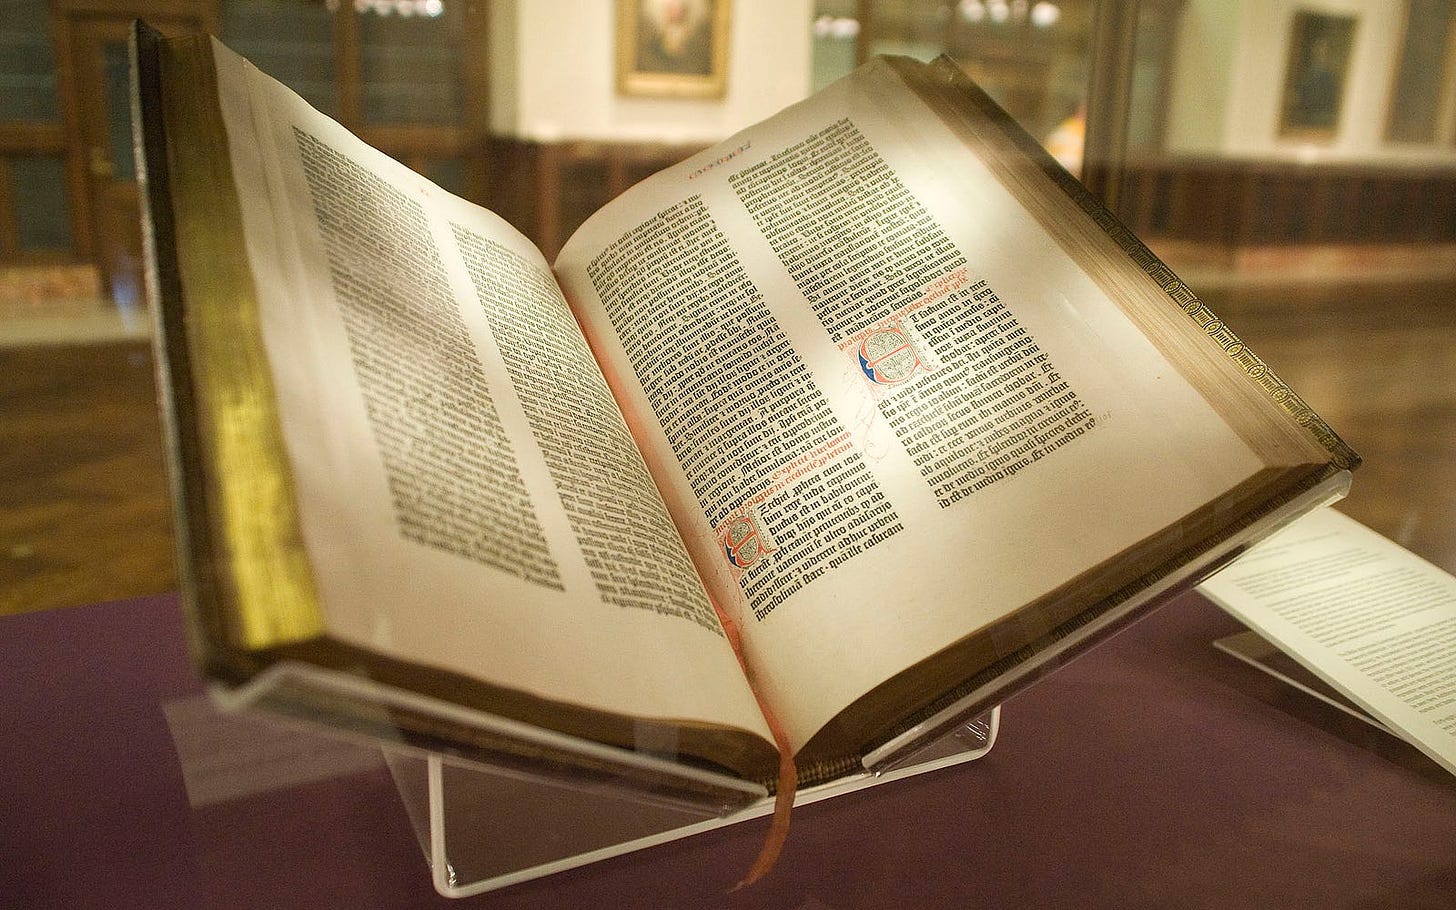 An image of the Gutenberg Bible in a museum exhibit